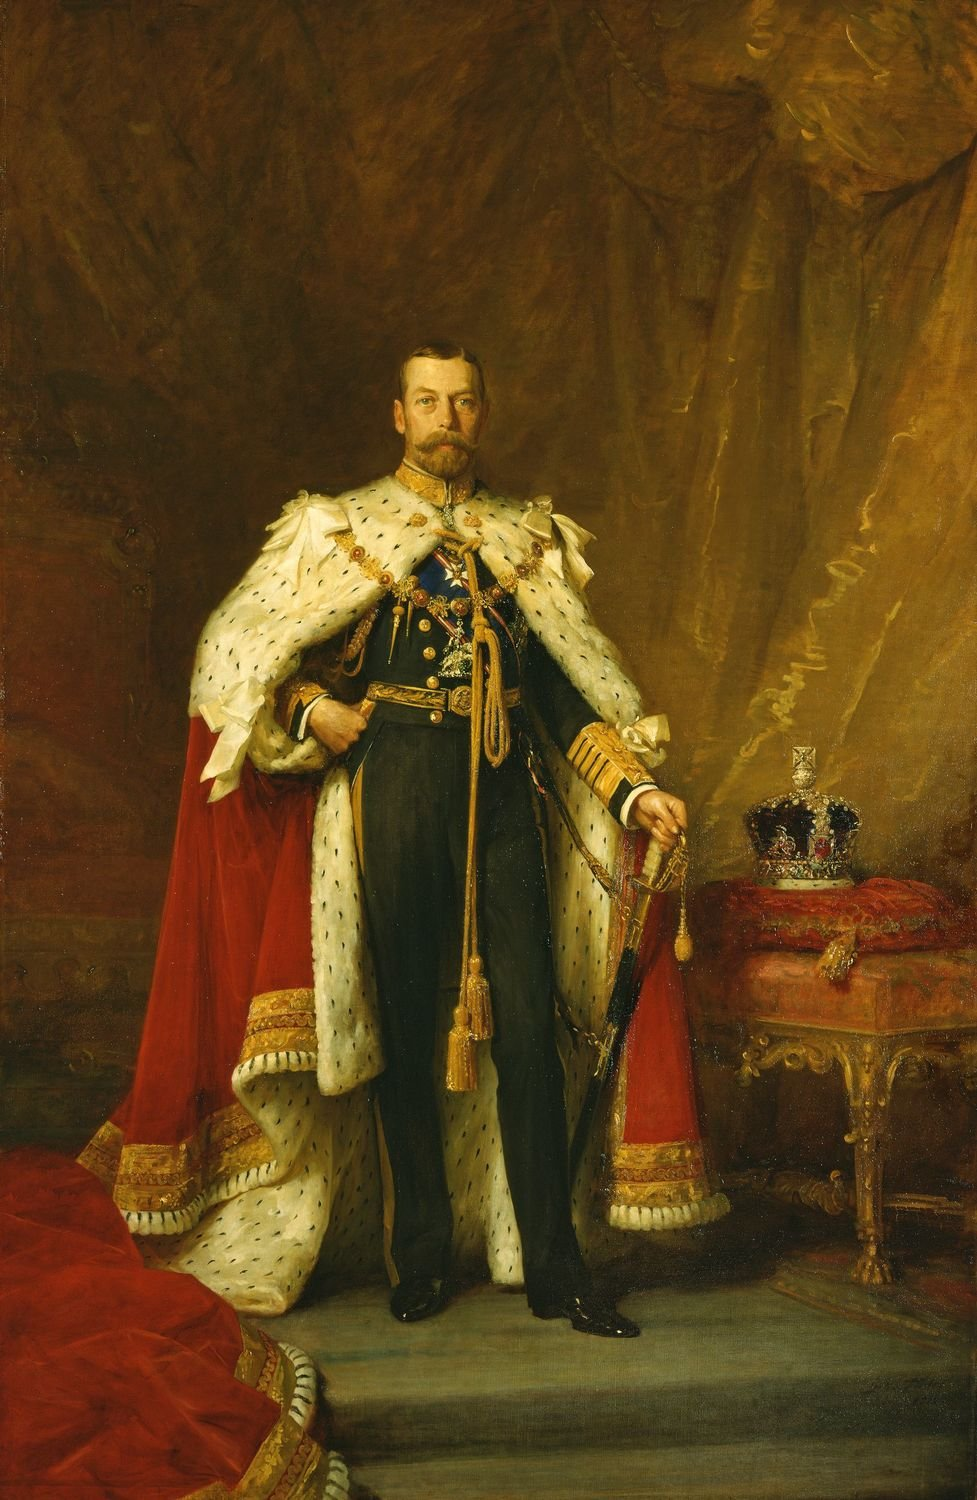 Artist portrait of King George V, dressed in a military uniform and a long flowing robe.